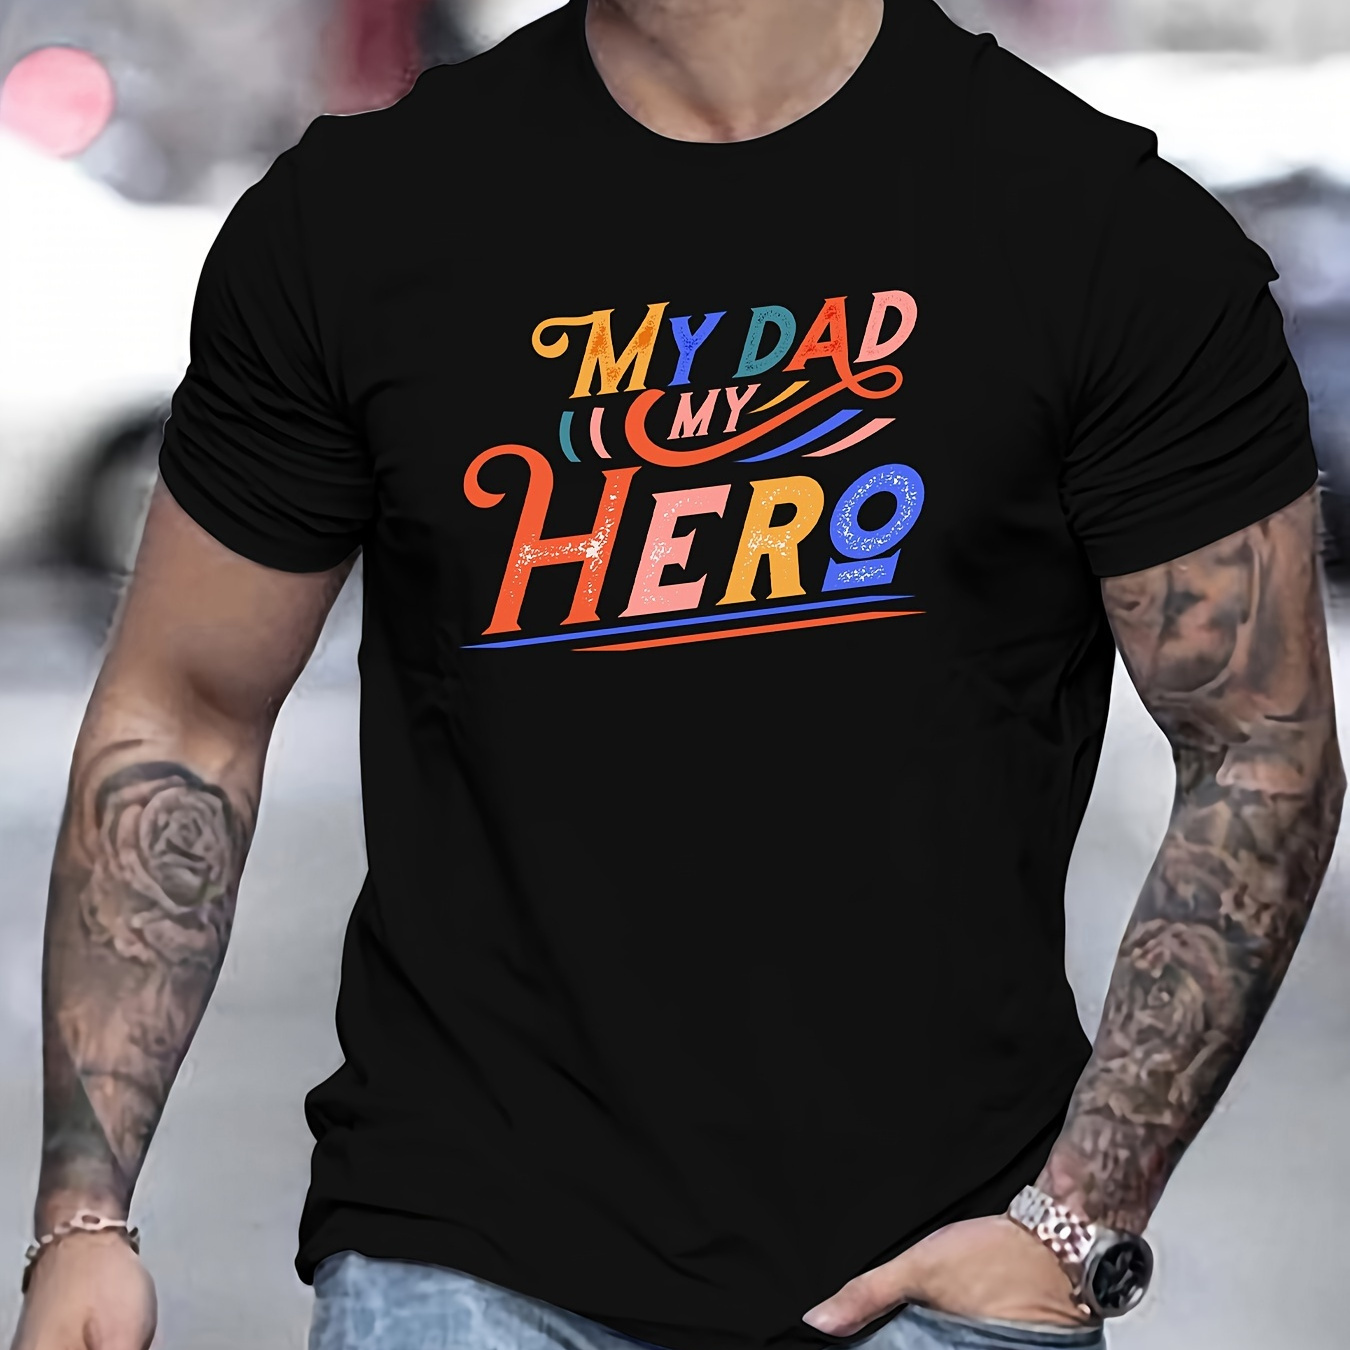 

My Dad My Hero Print, Men's Round Crew Neck Short Sleeve, Simple Style Tee Fashion Regular Fit T-shirt, Casual Comfy Top For Spring Summer Holiday Leisure Vacation Men's Clothing As Gift Father's Day